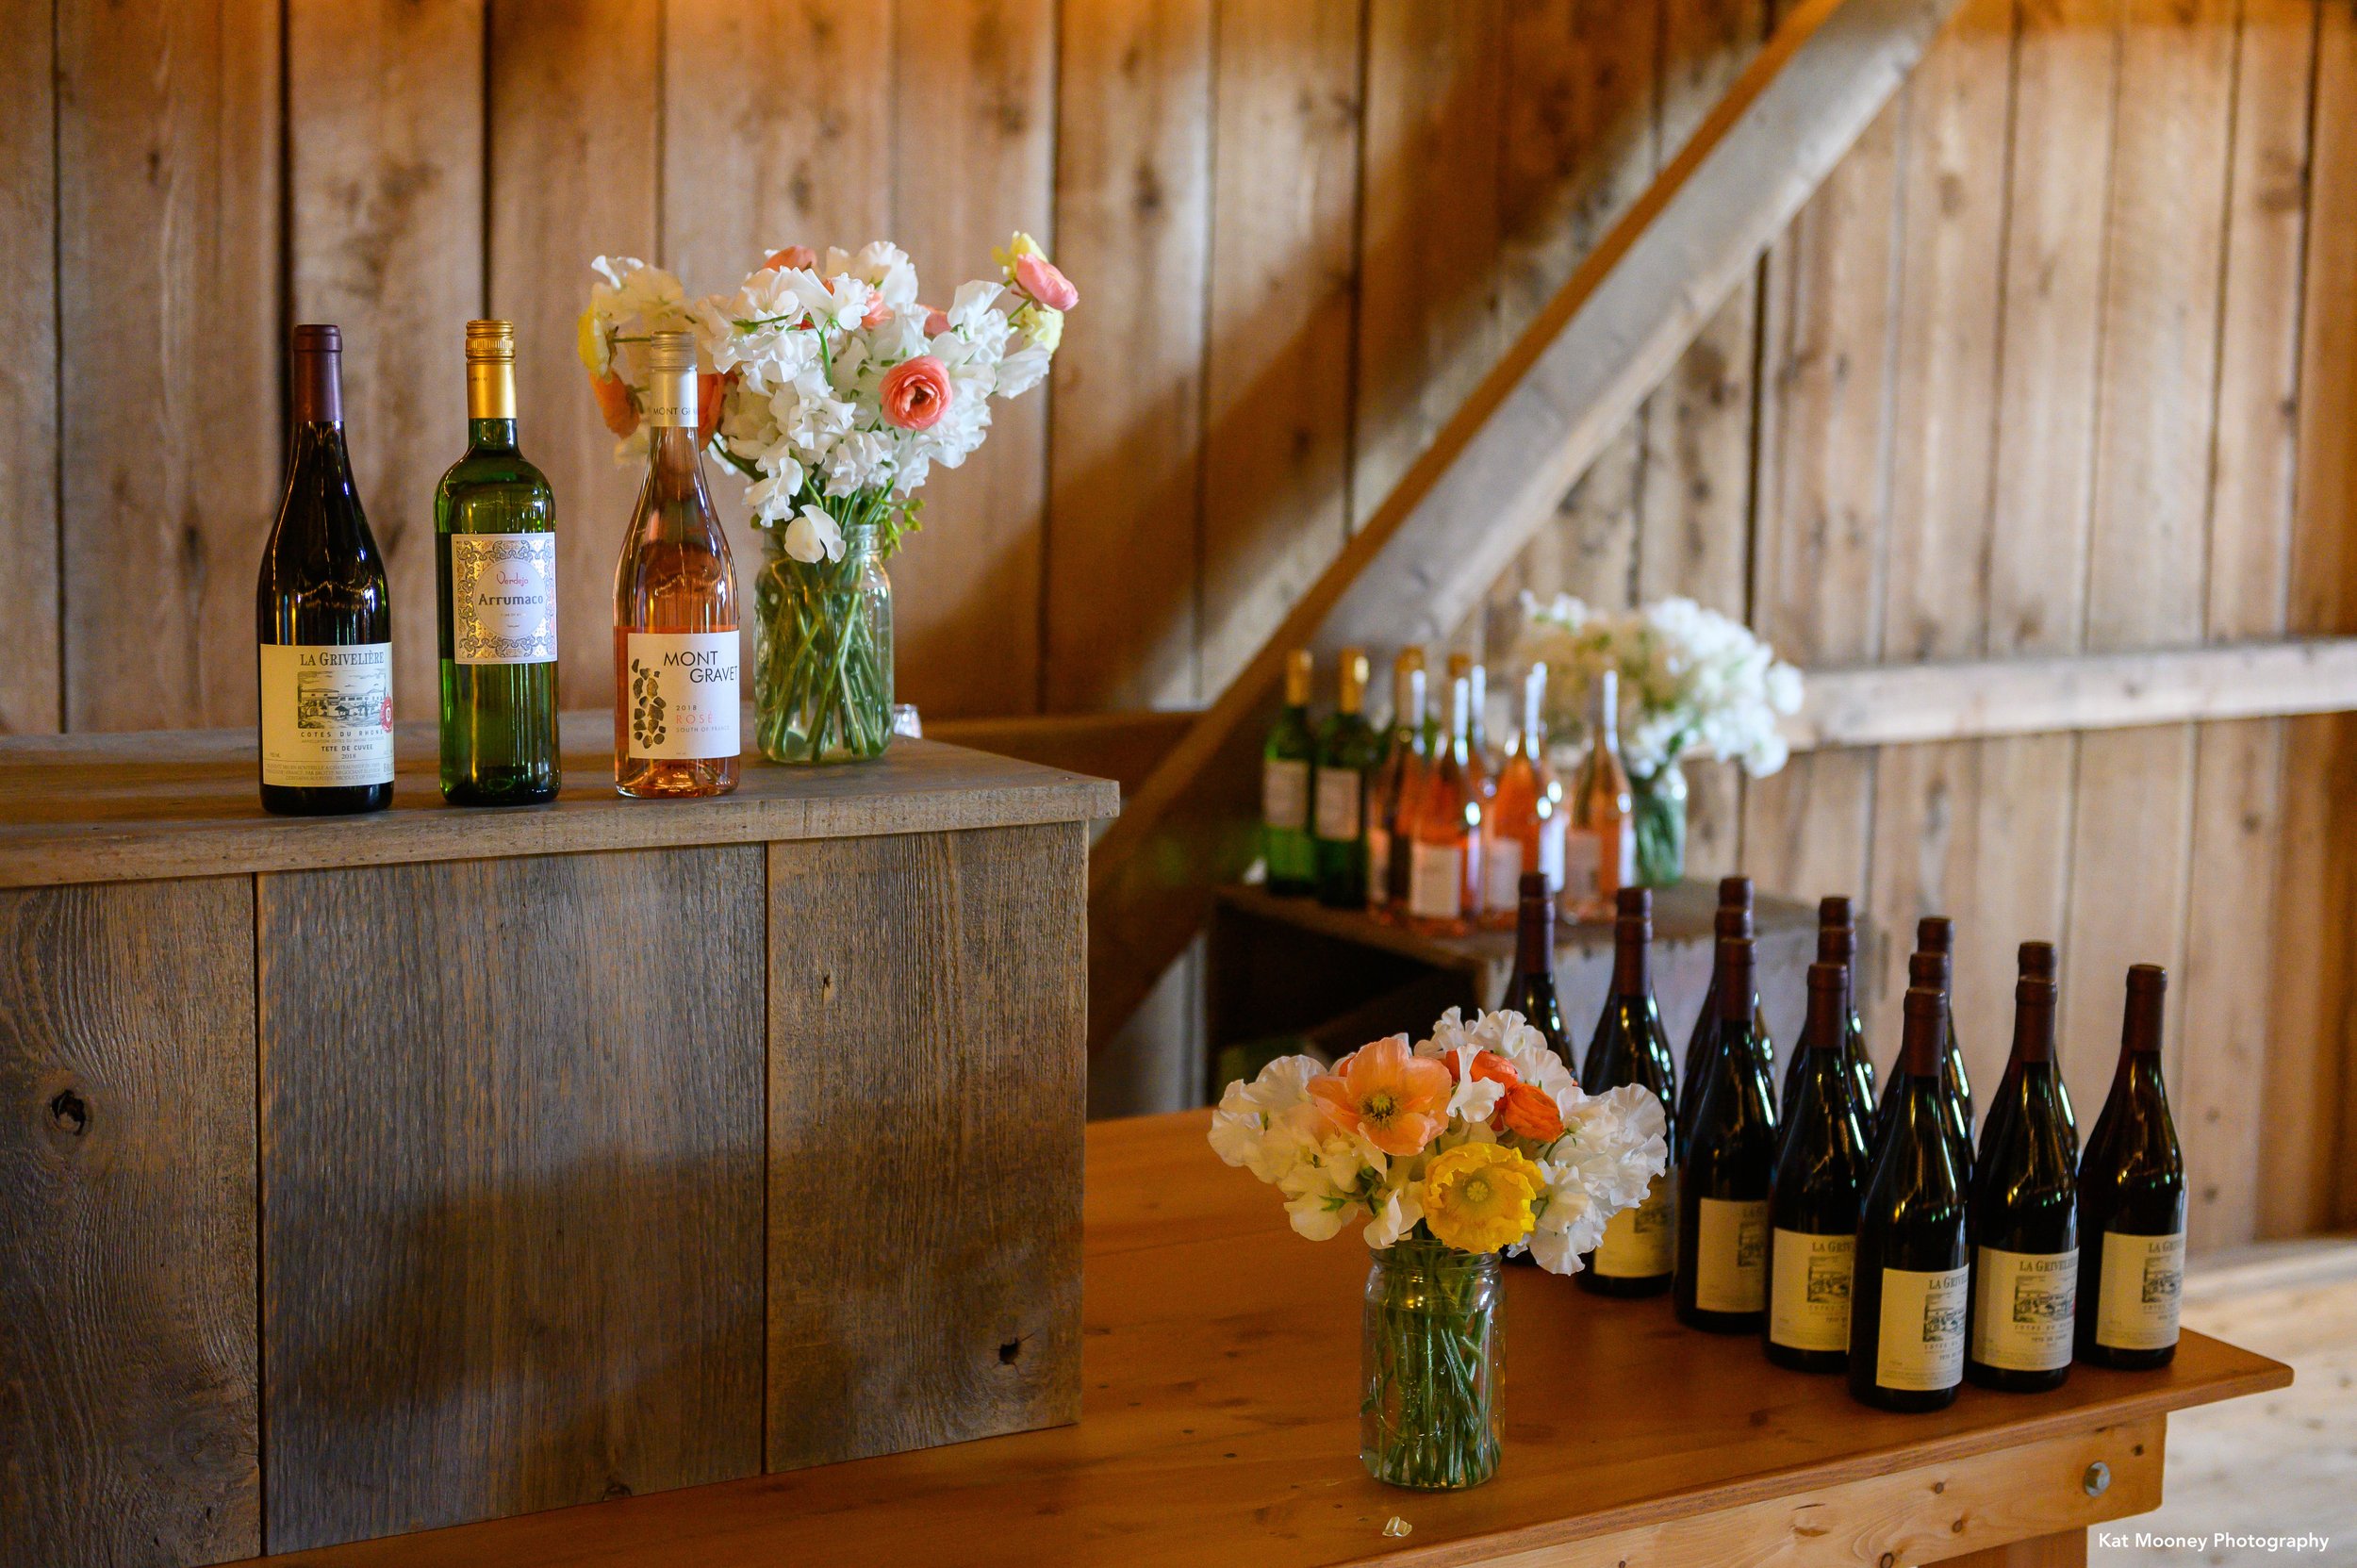 The bar set up with wine bottles and flowers for an event on the side of a barn